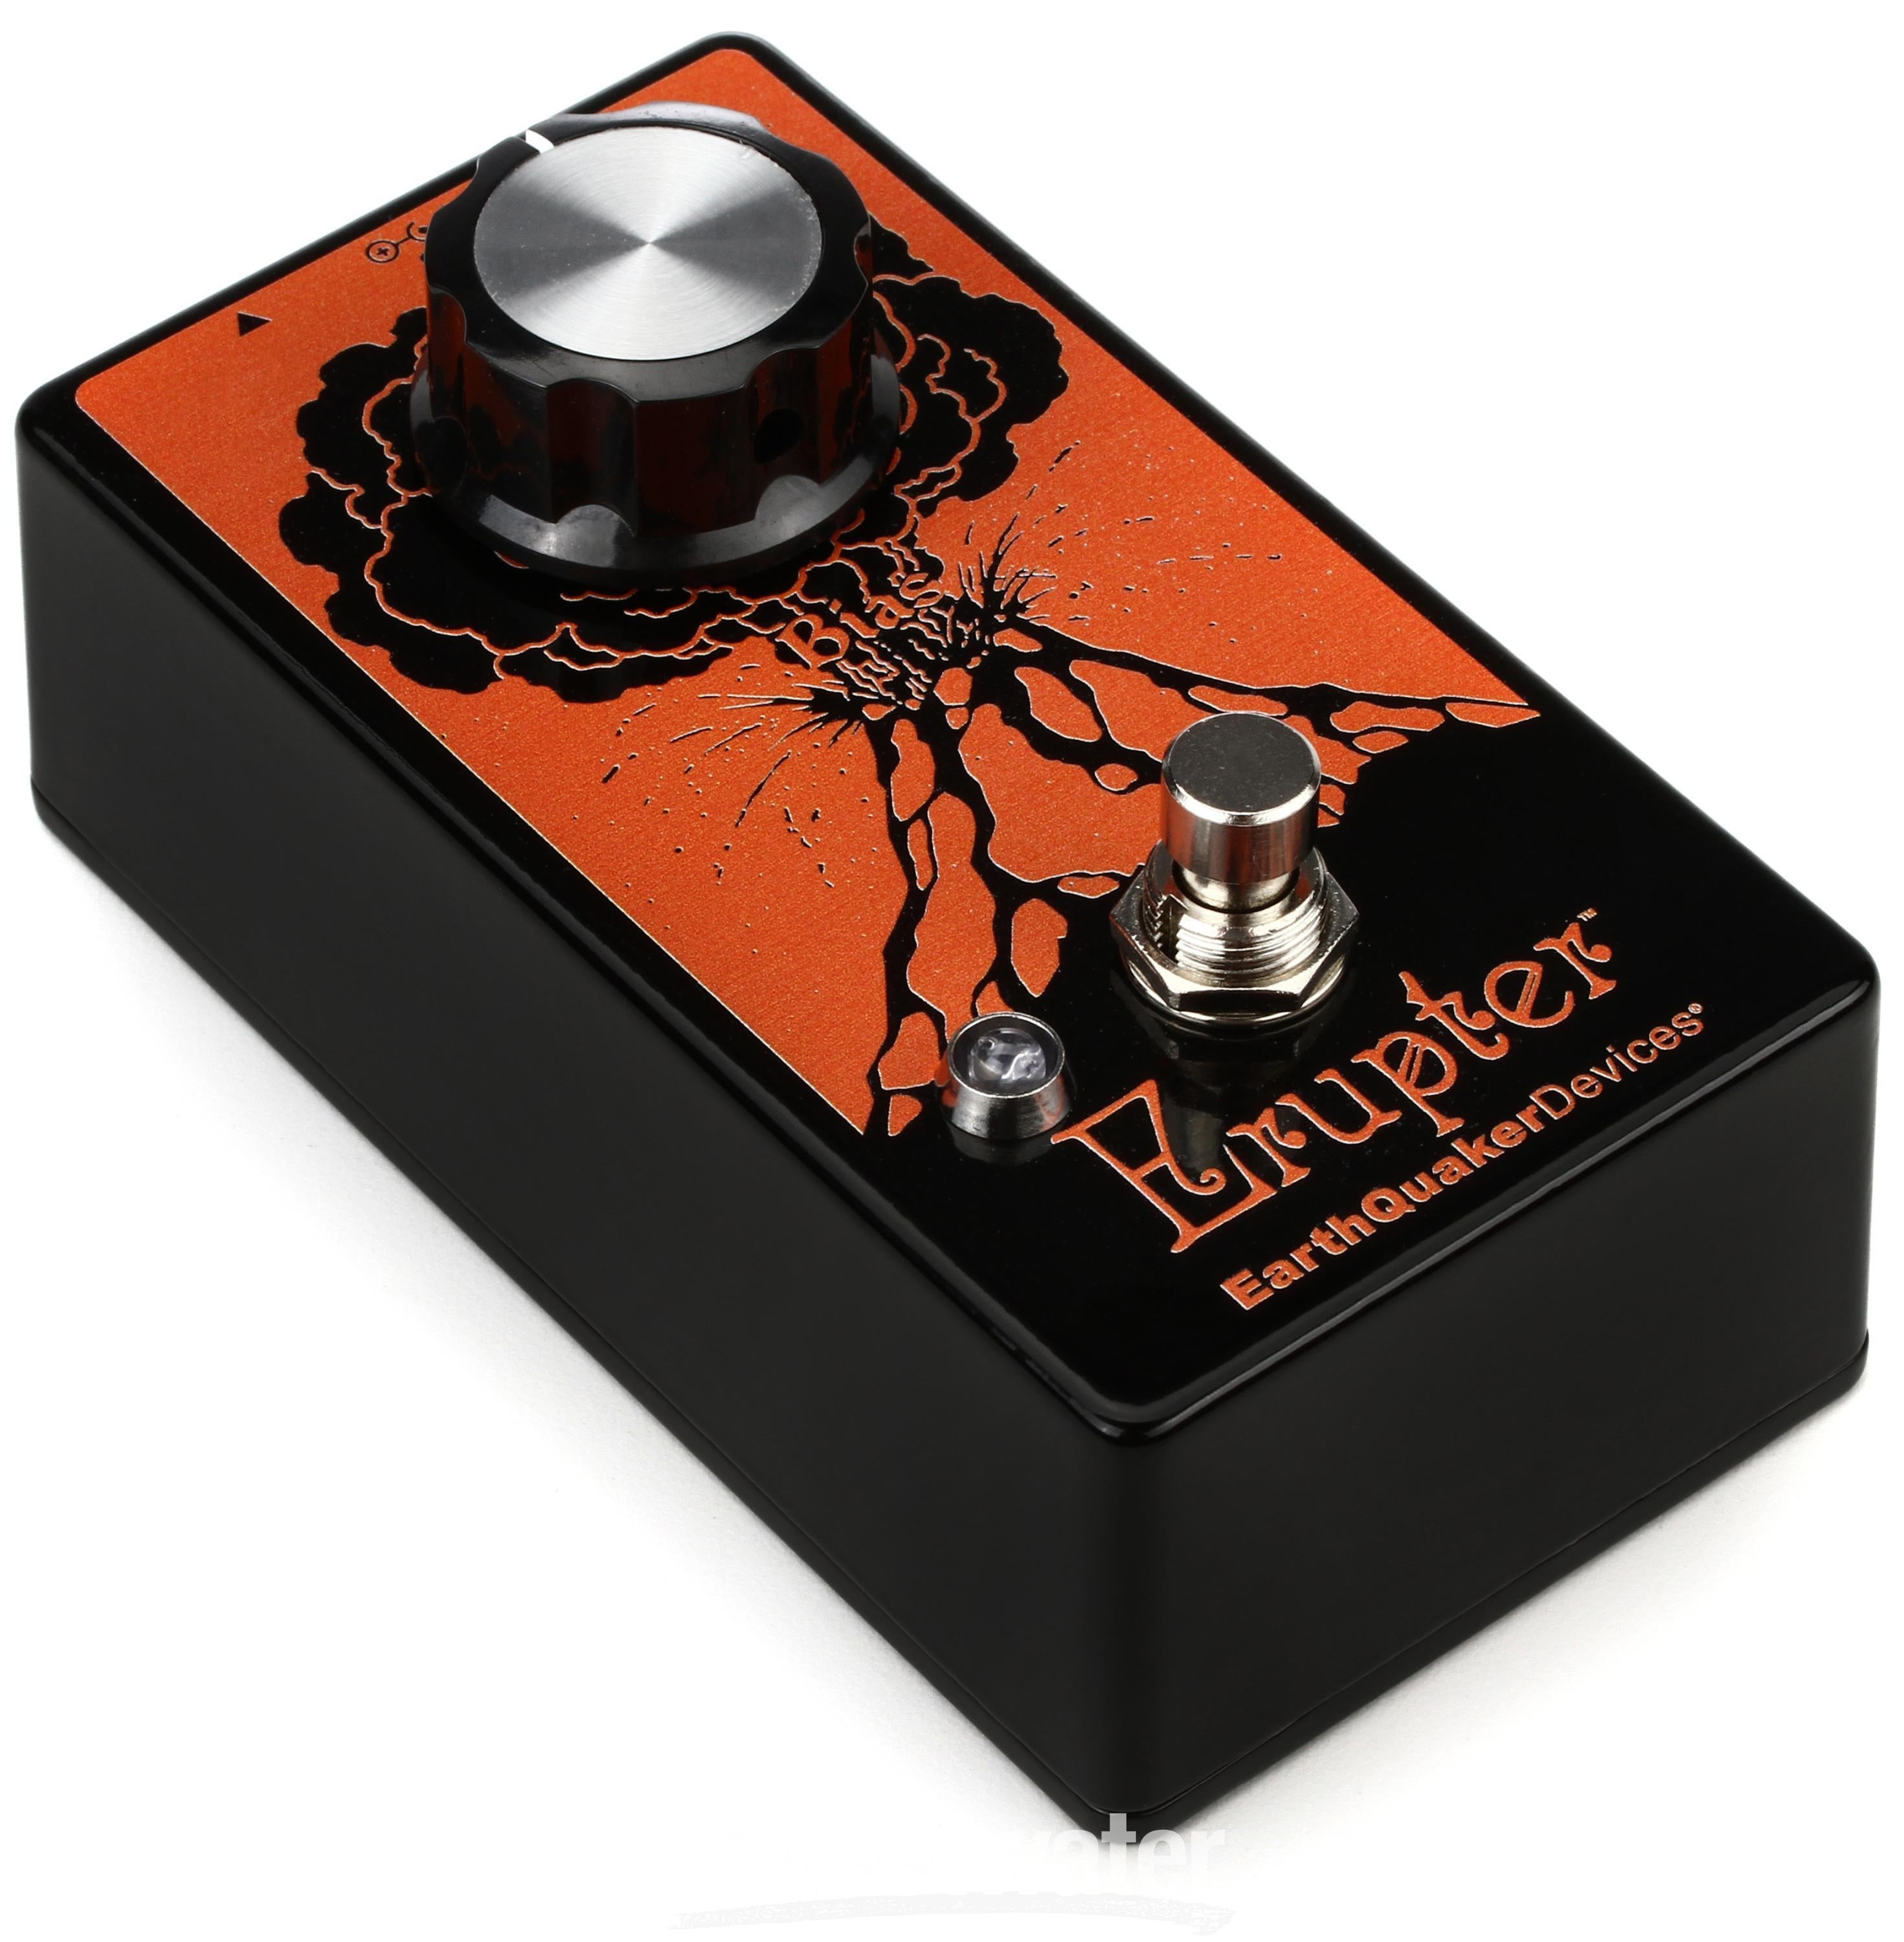 EarthQuaker Devices Erupter Fuzz Pedal | Sweetwater